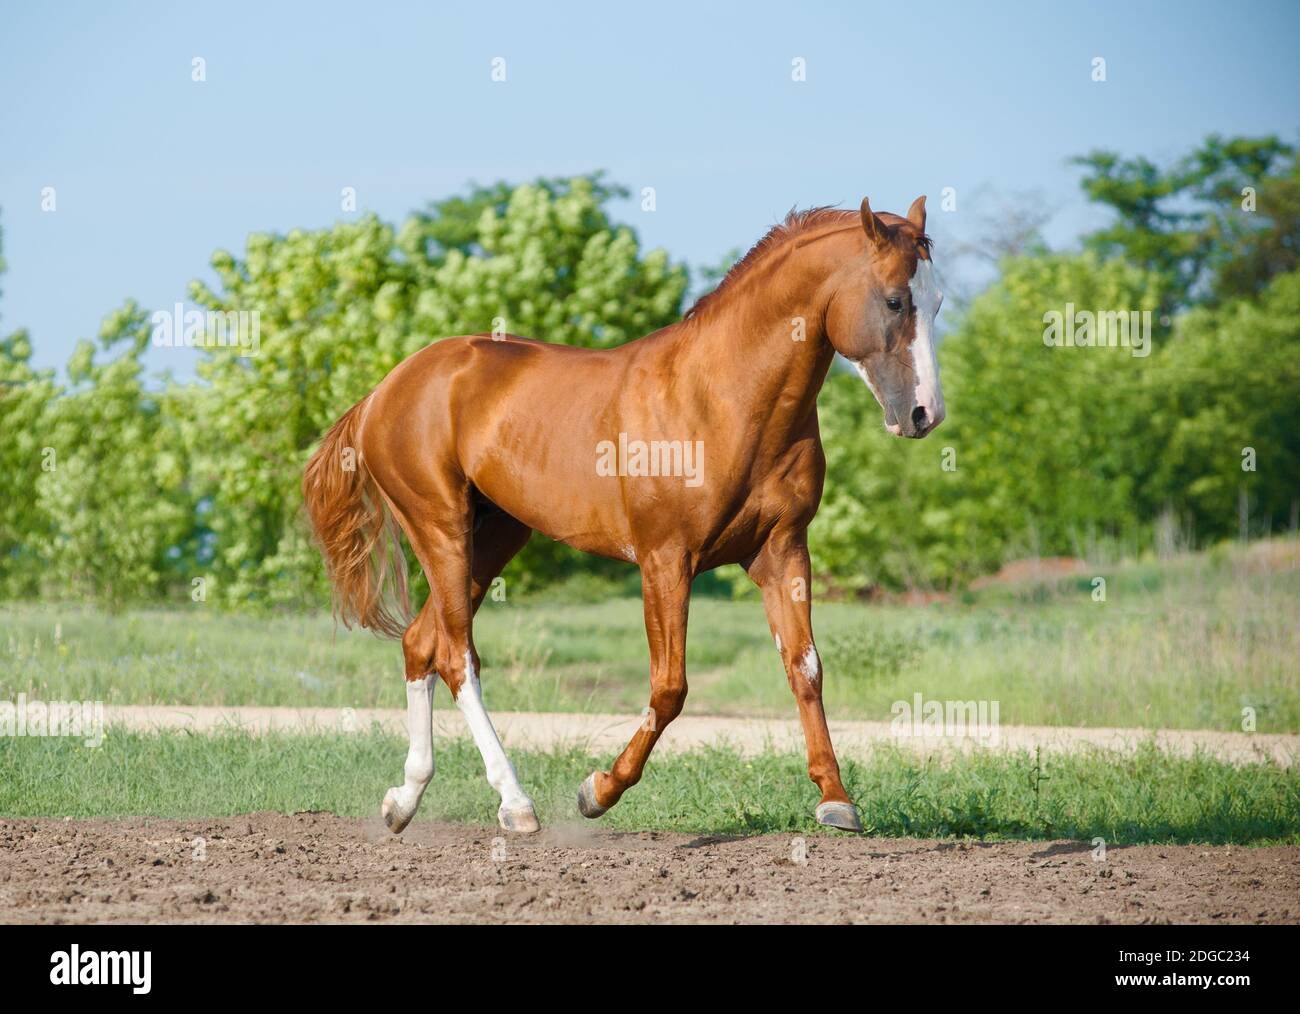 Chestnut horse walking in a field paddock outdoors Stock Photo